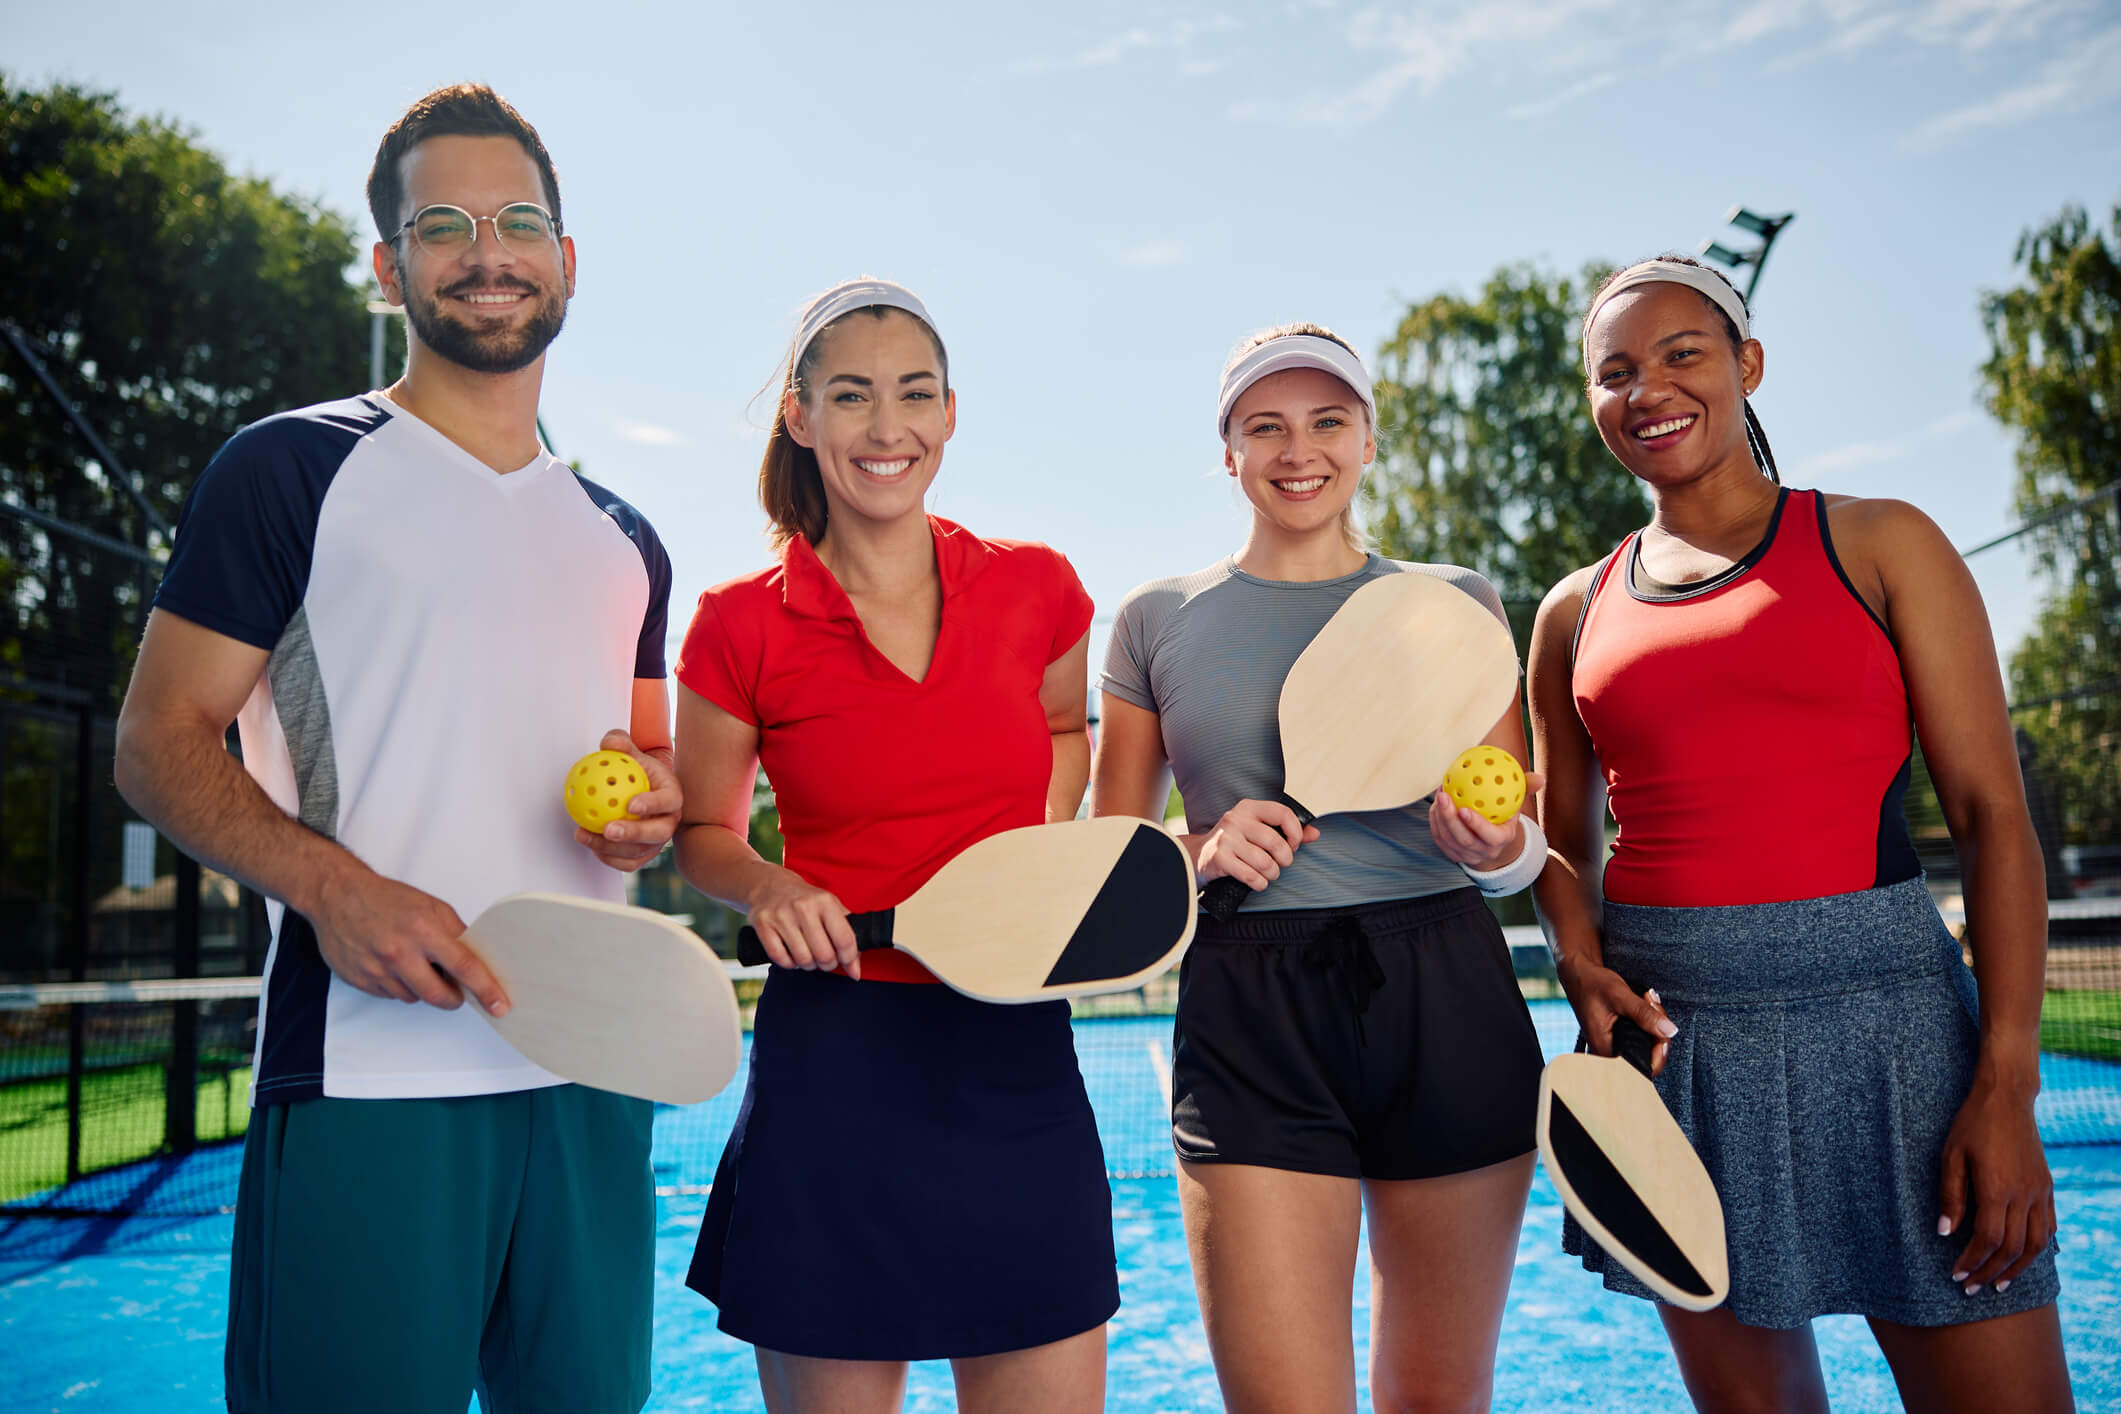 Four vibrant, happy pickleball players holding paddles